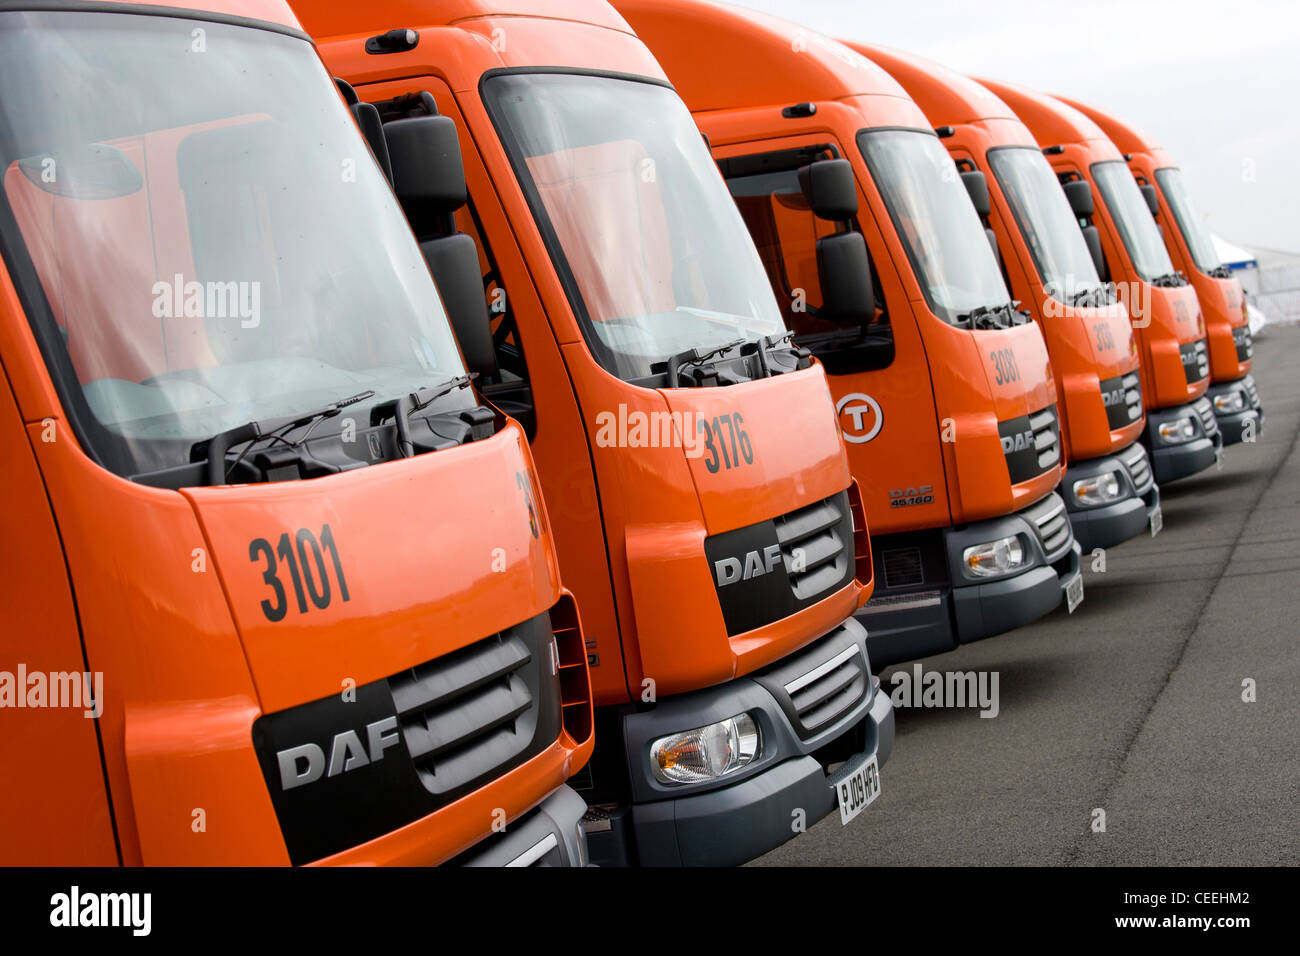 A row of DAF TNT livered trucks. Stock Photo